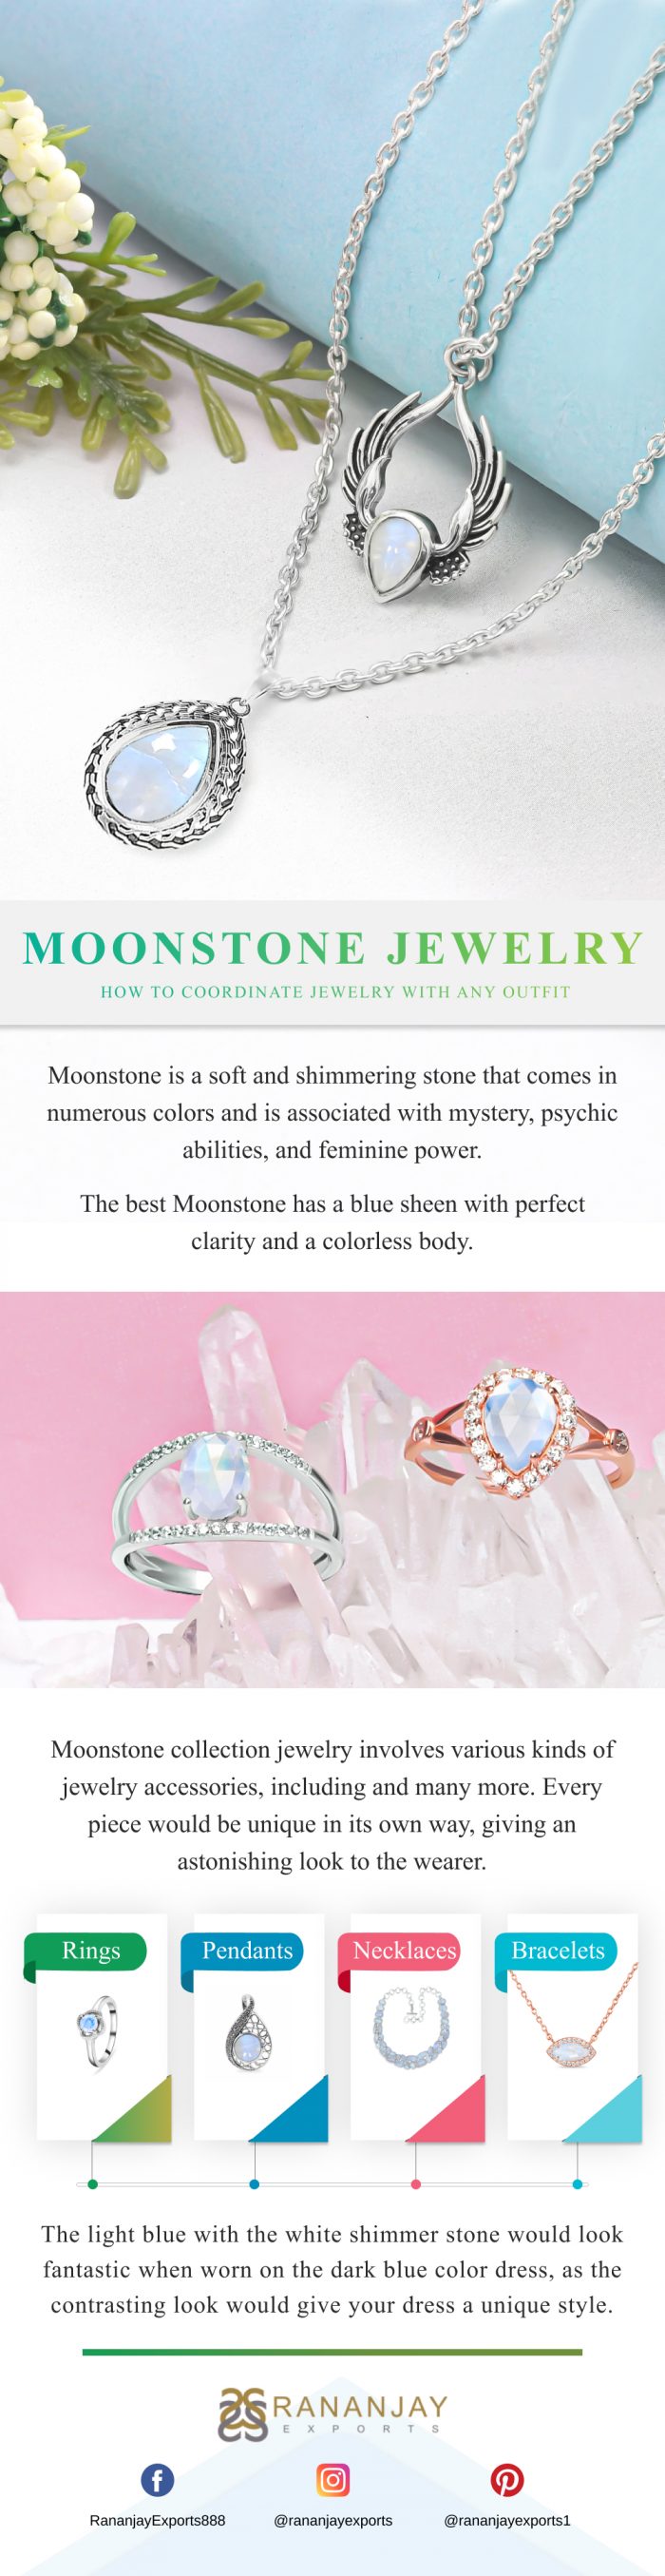 Moonstone Jewelry How to Coordinate Jewelry With Any Outfit?